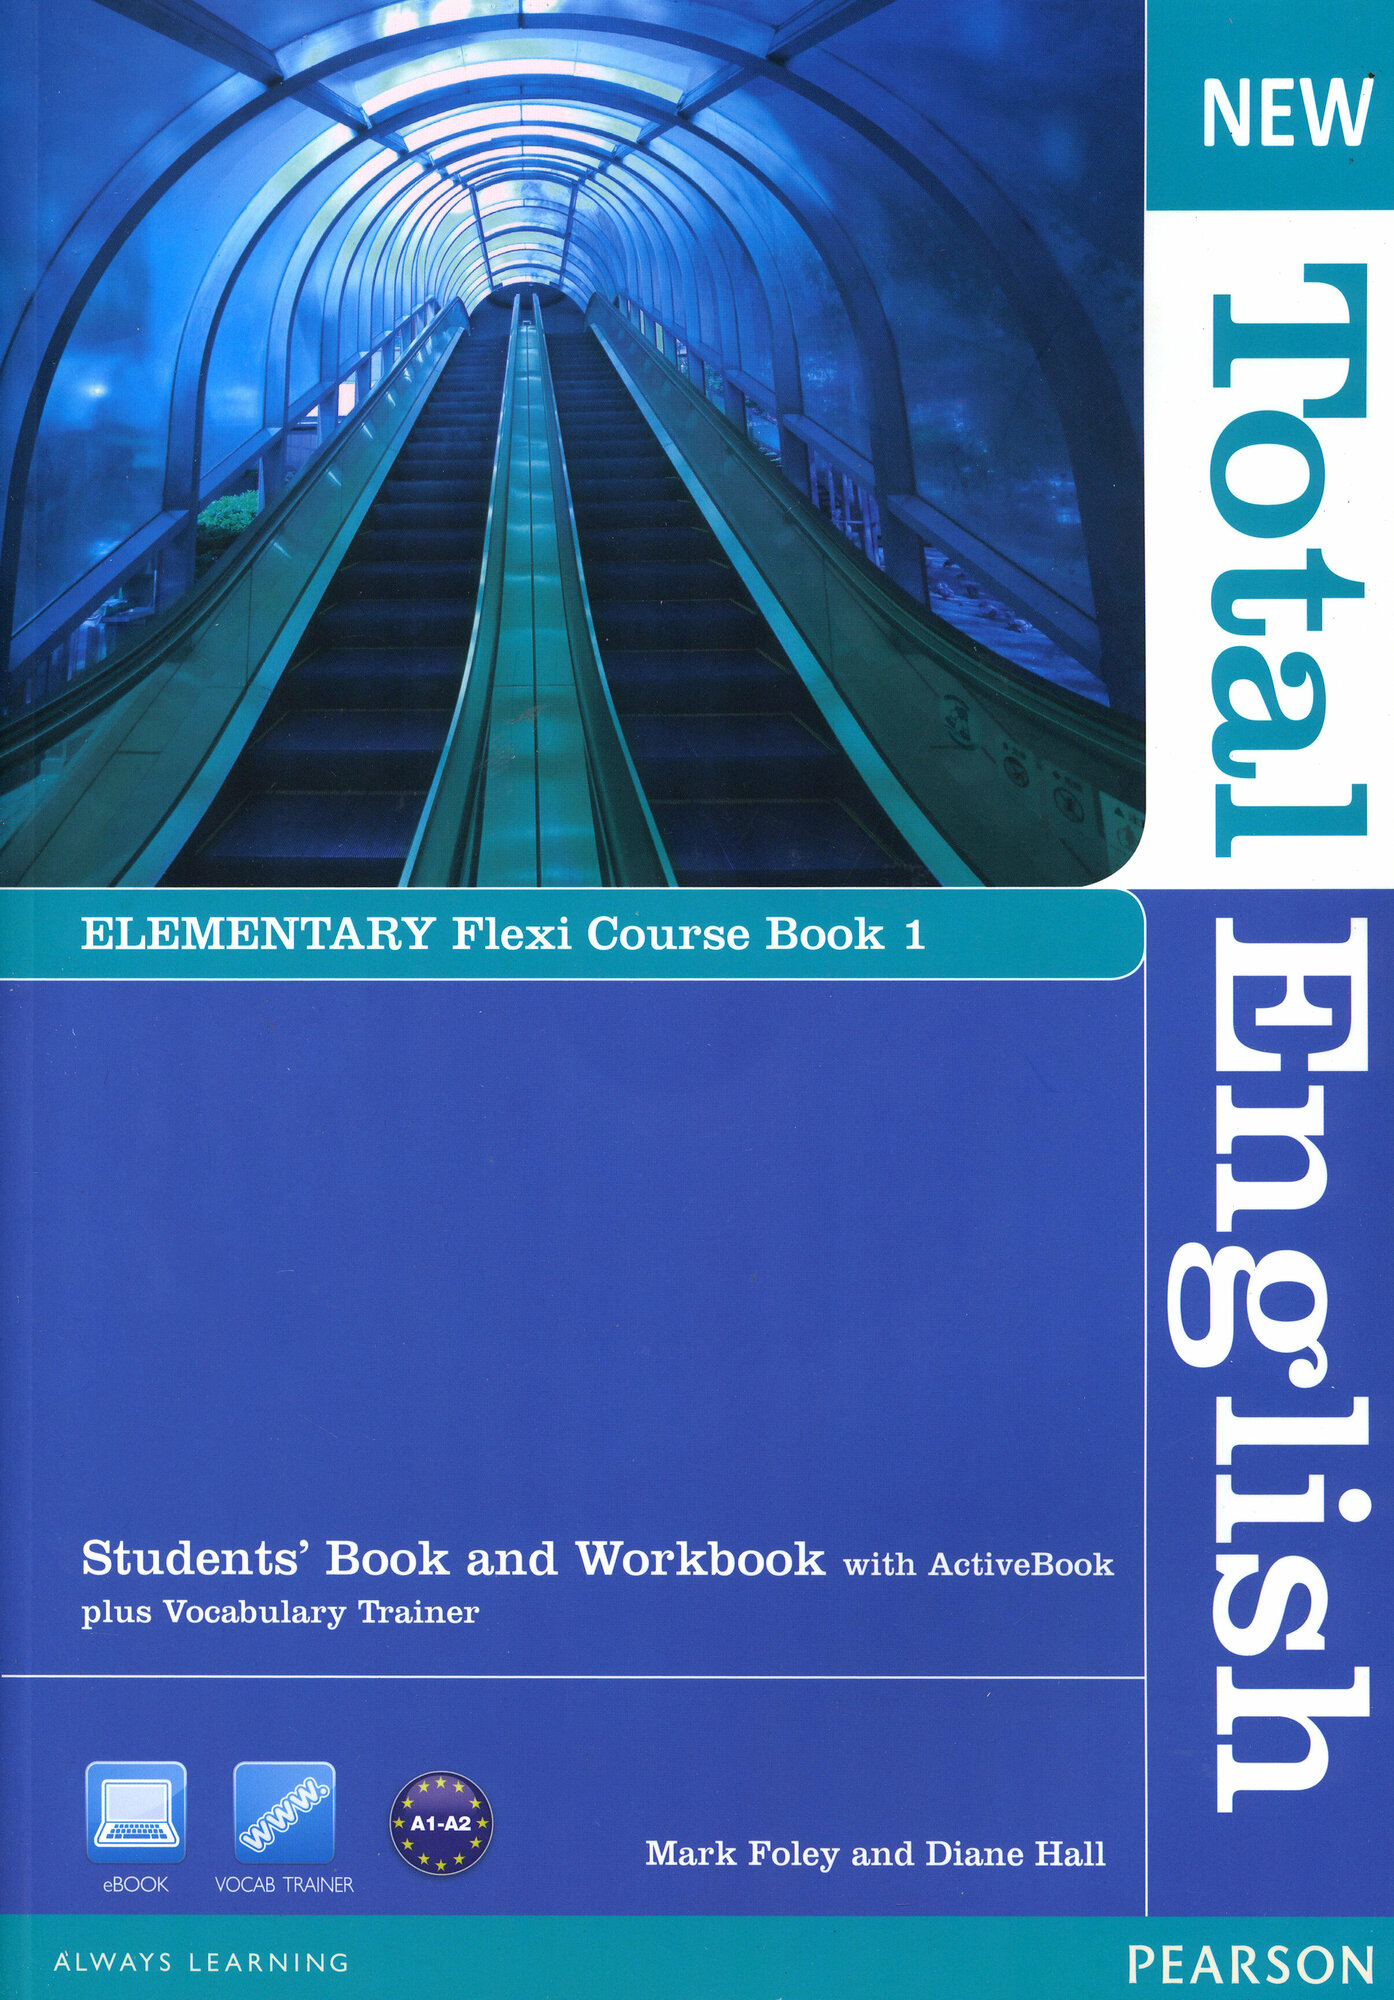 New Total English. Elementary. Flexi Coursebook 1. Student's Book and Workbook and ActiveBook (+DVD) / Учебник / Foley Mark